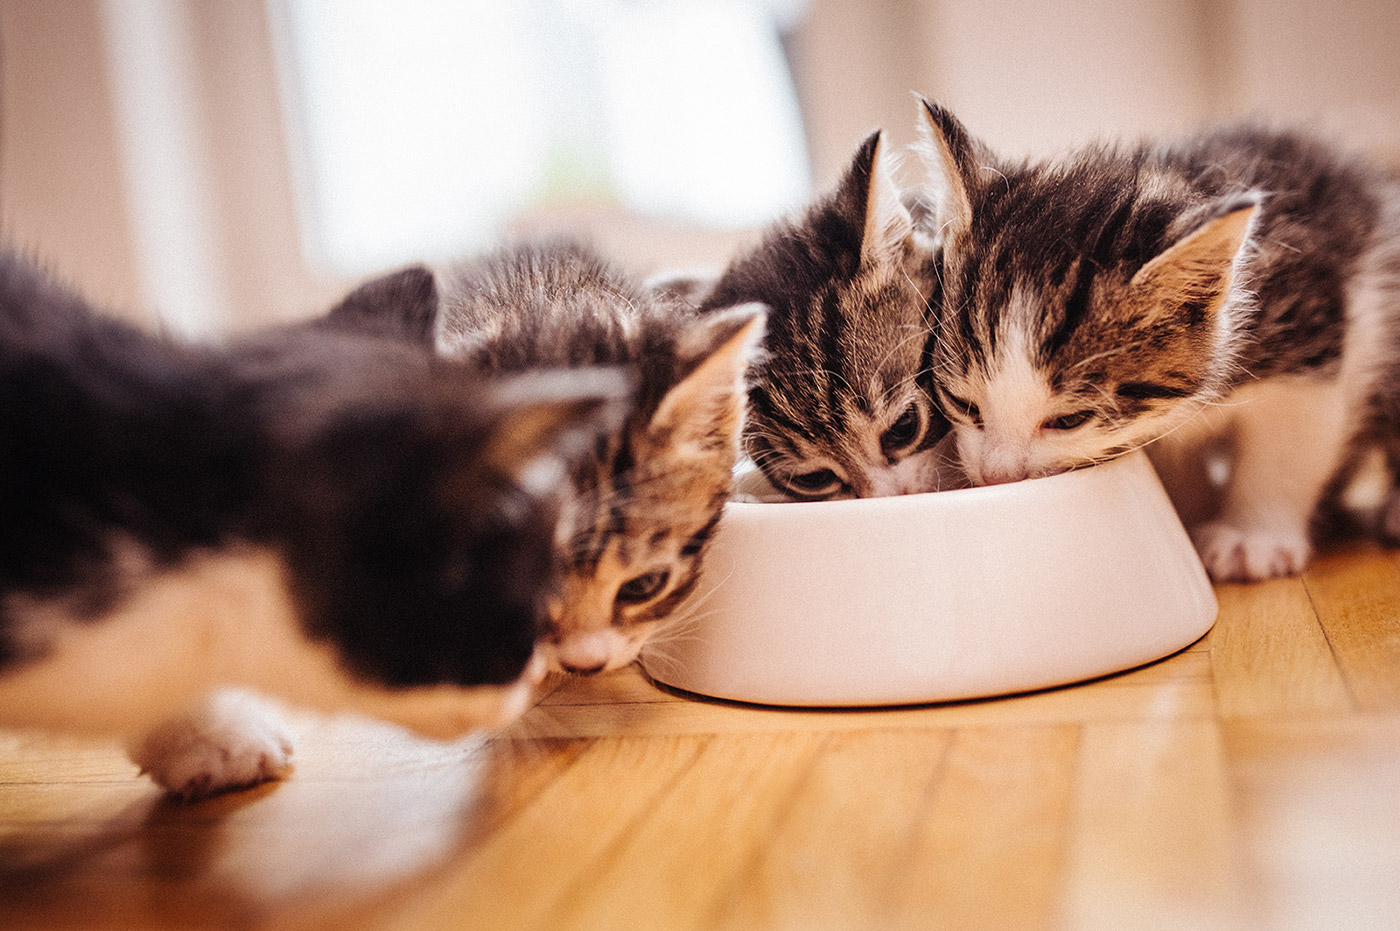 4 small kittens eating out of a food bowl.